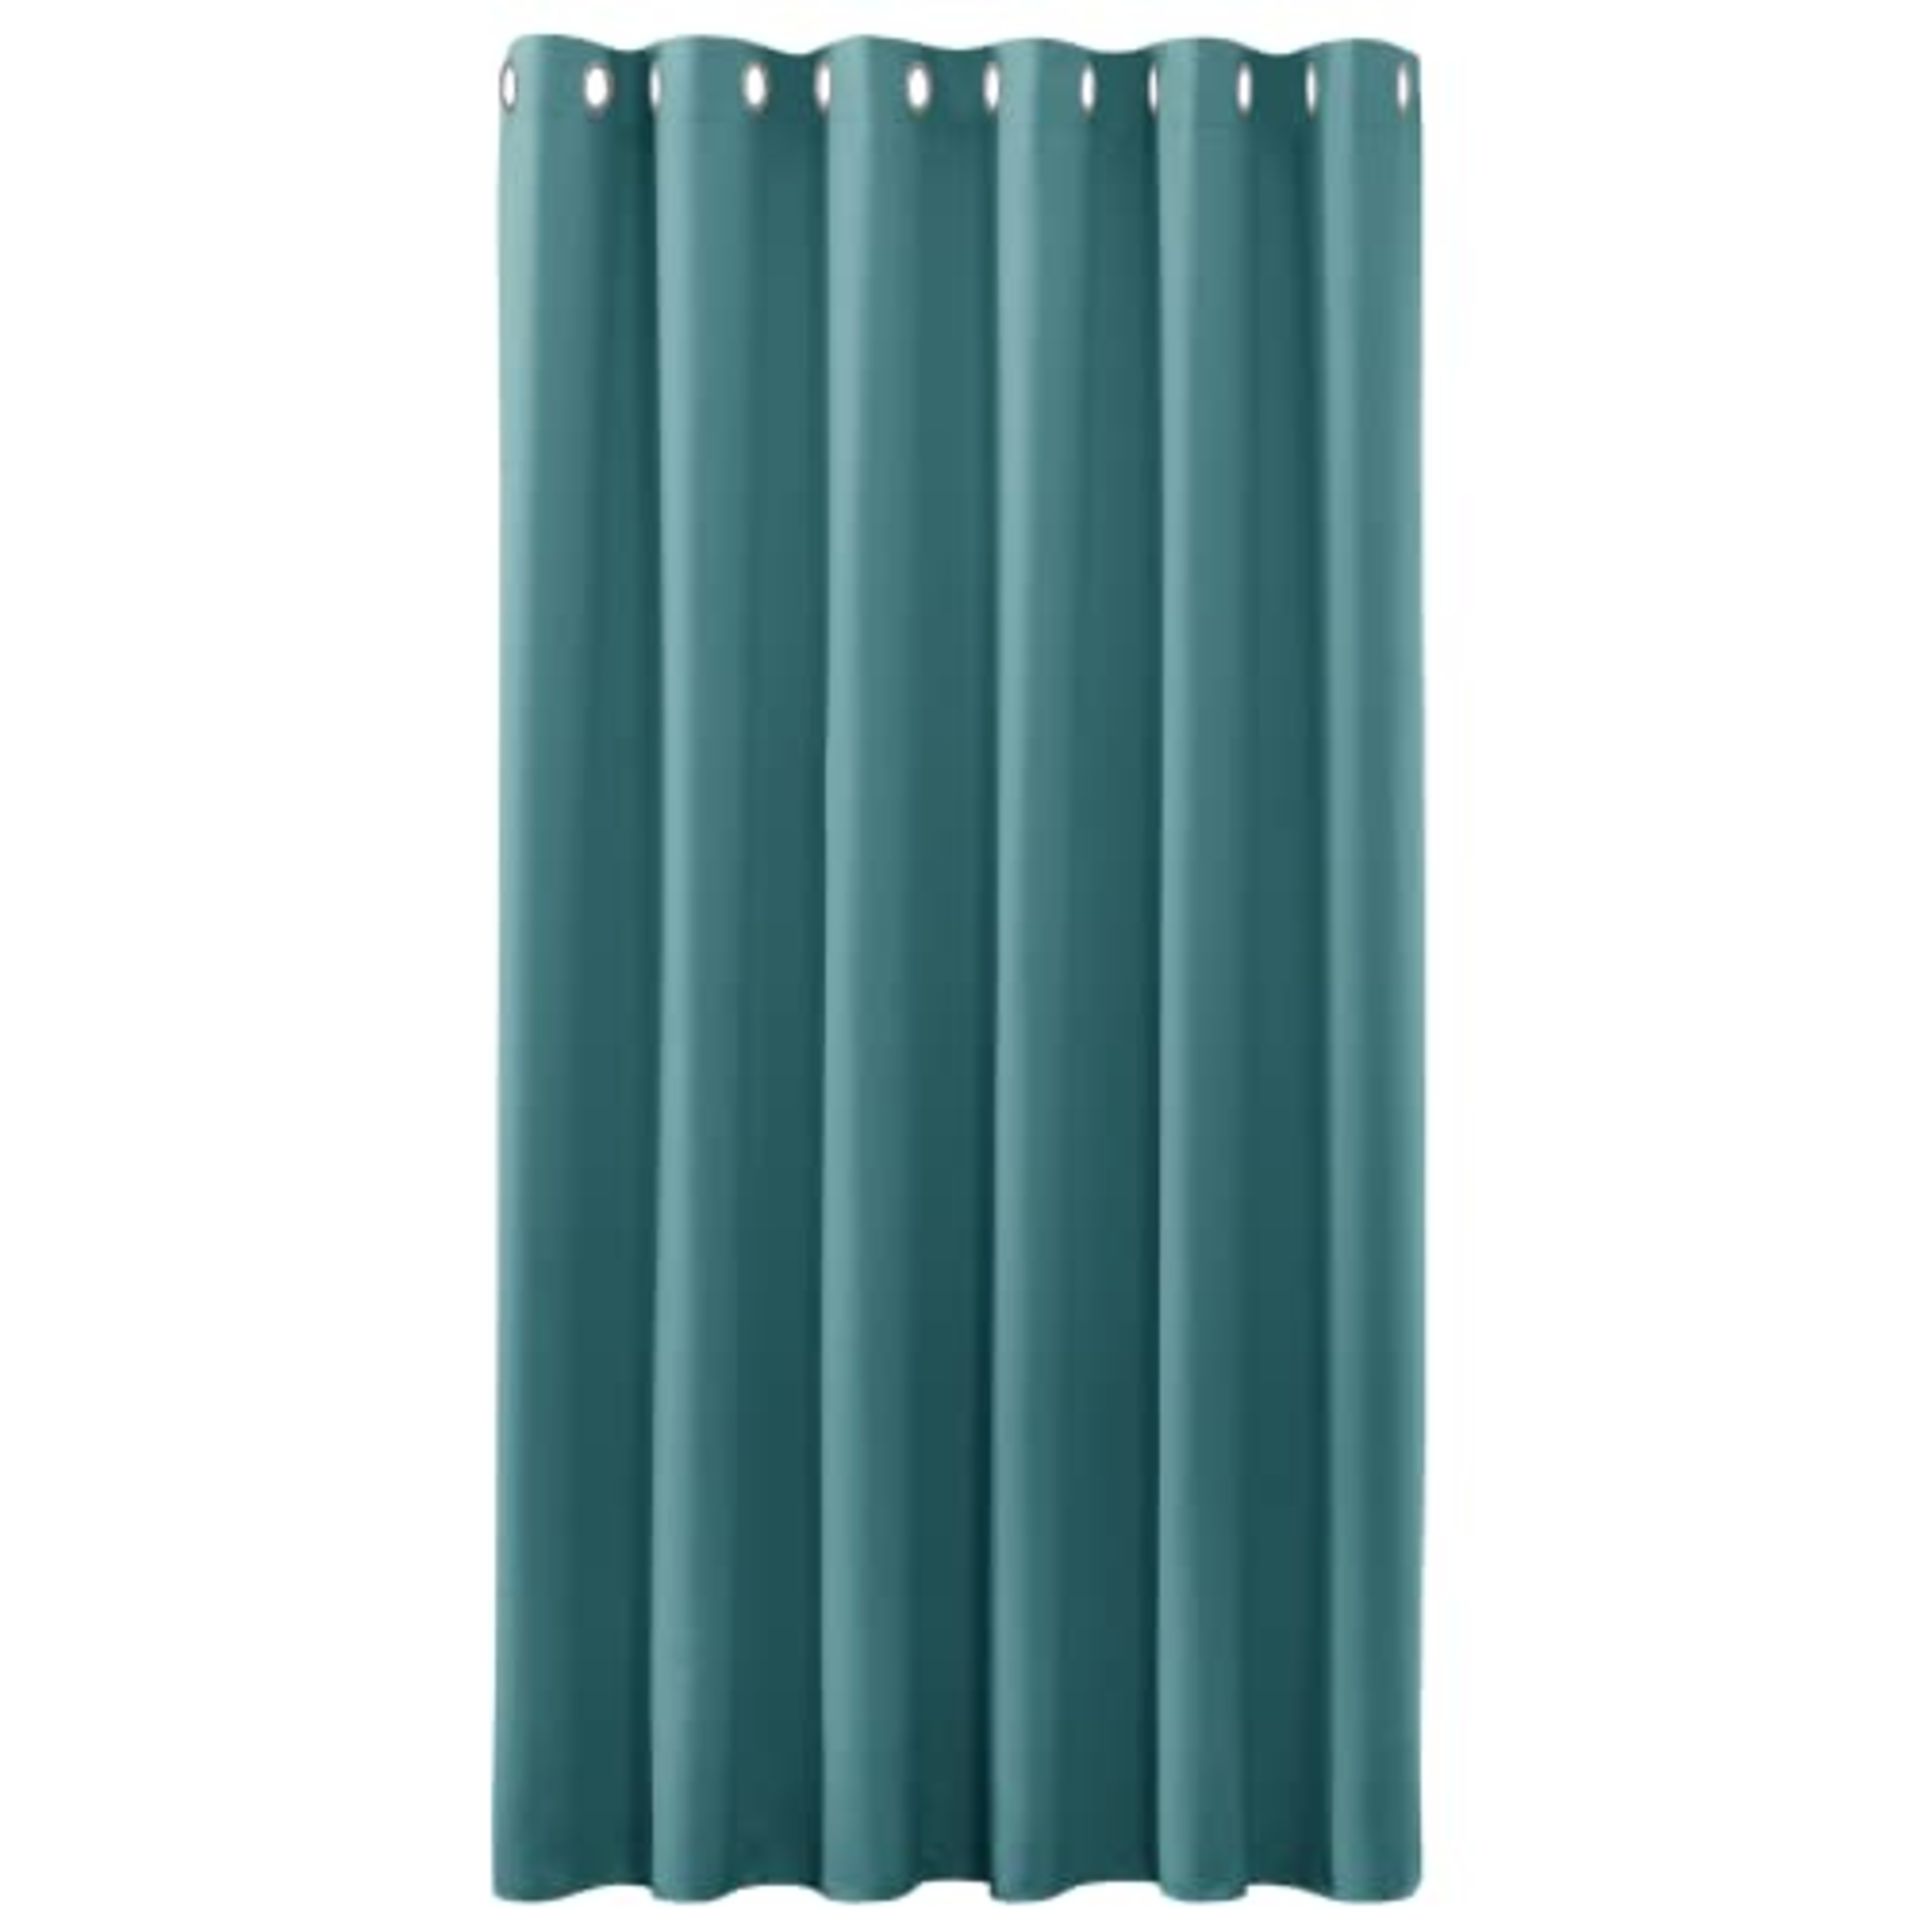 PONY DANCE Blackout Curtain Panel - Thermal Insulated Room Darkening Window Treatment